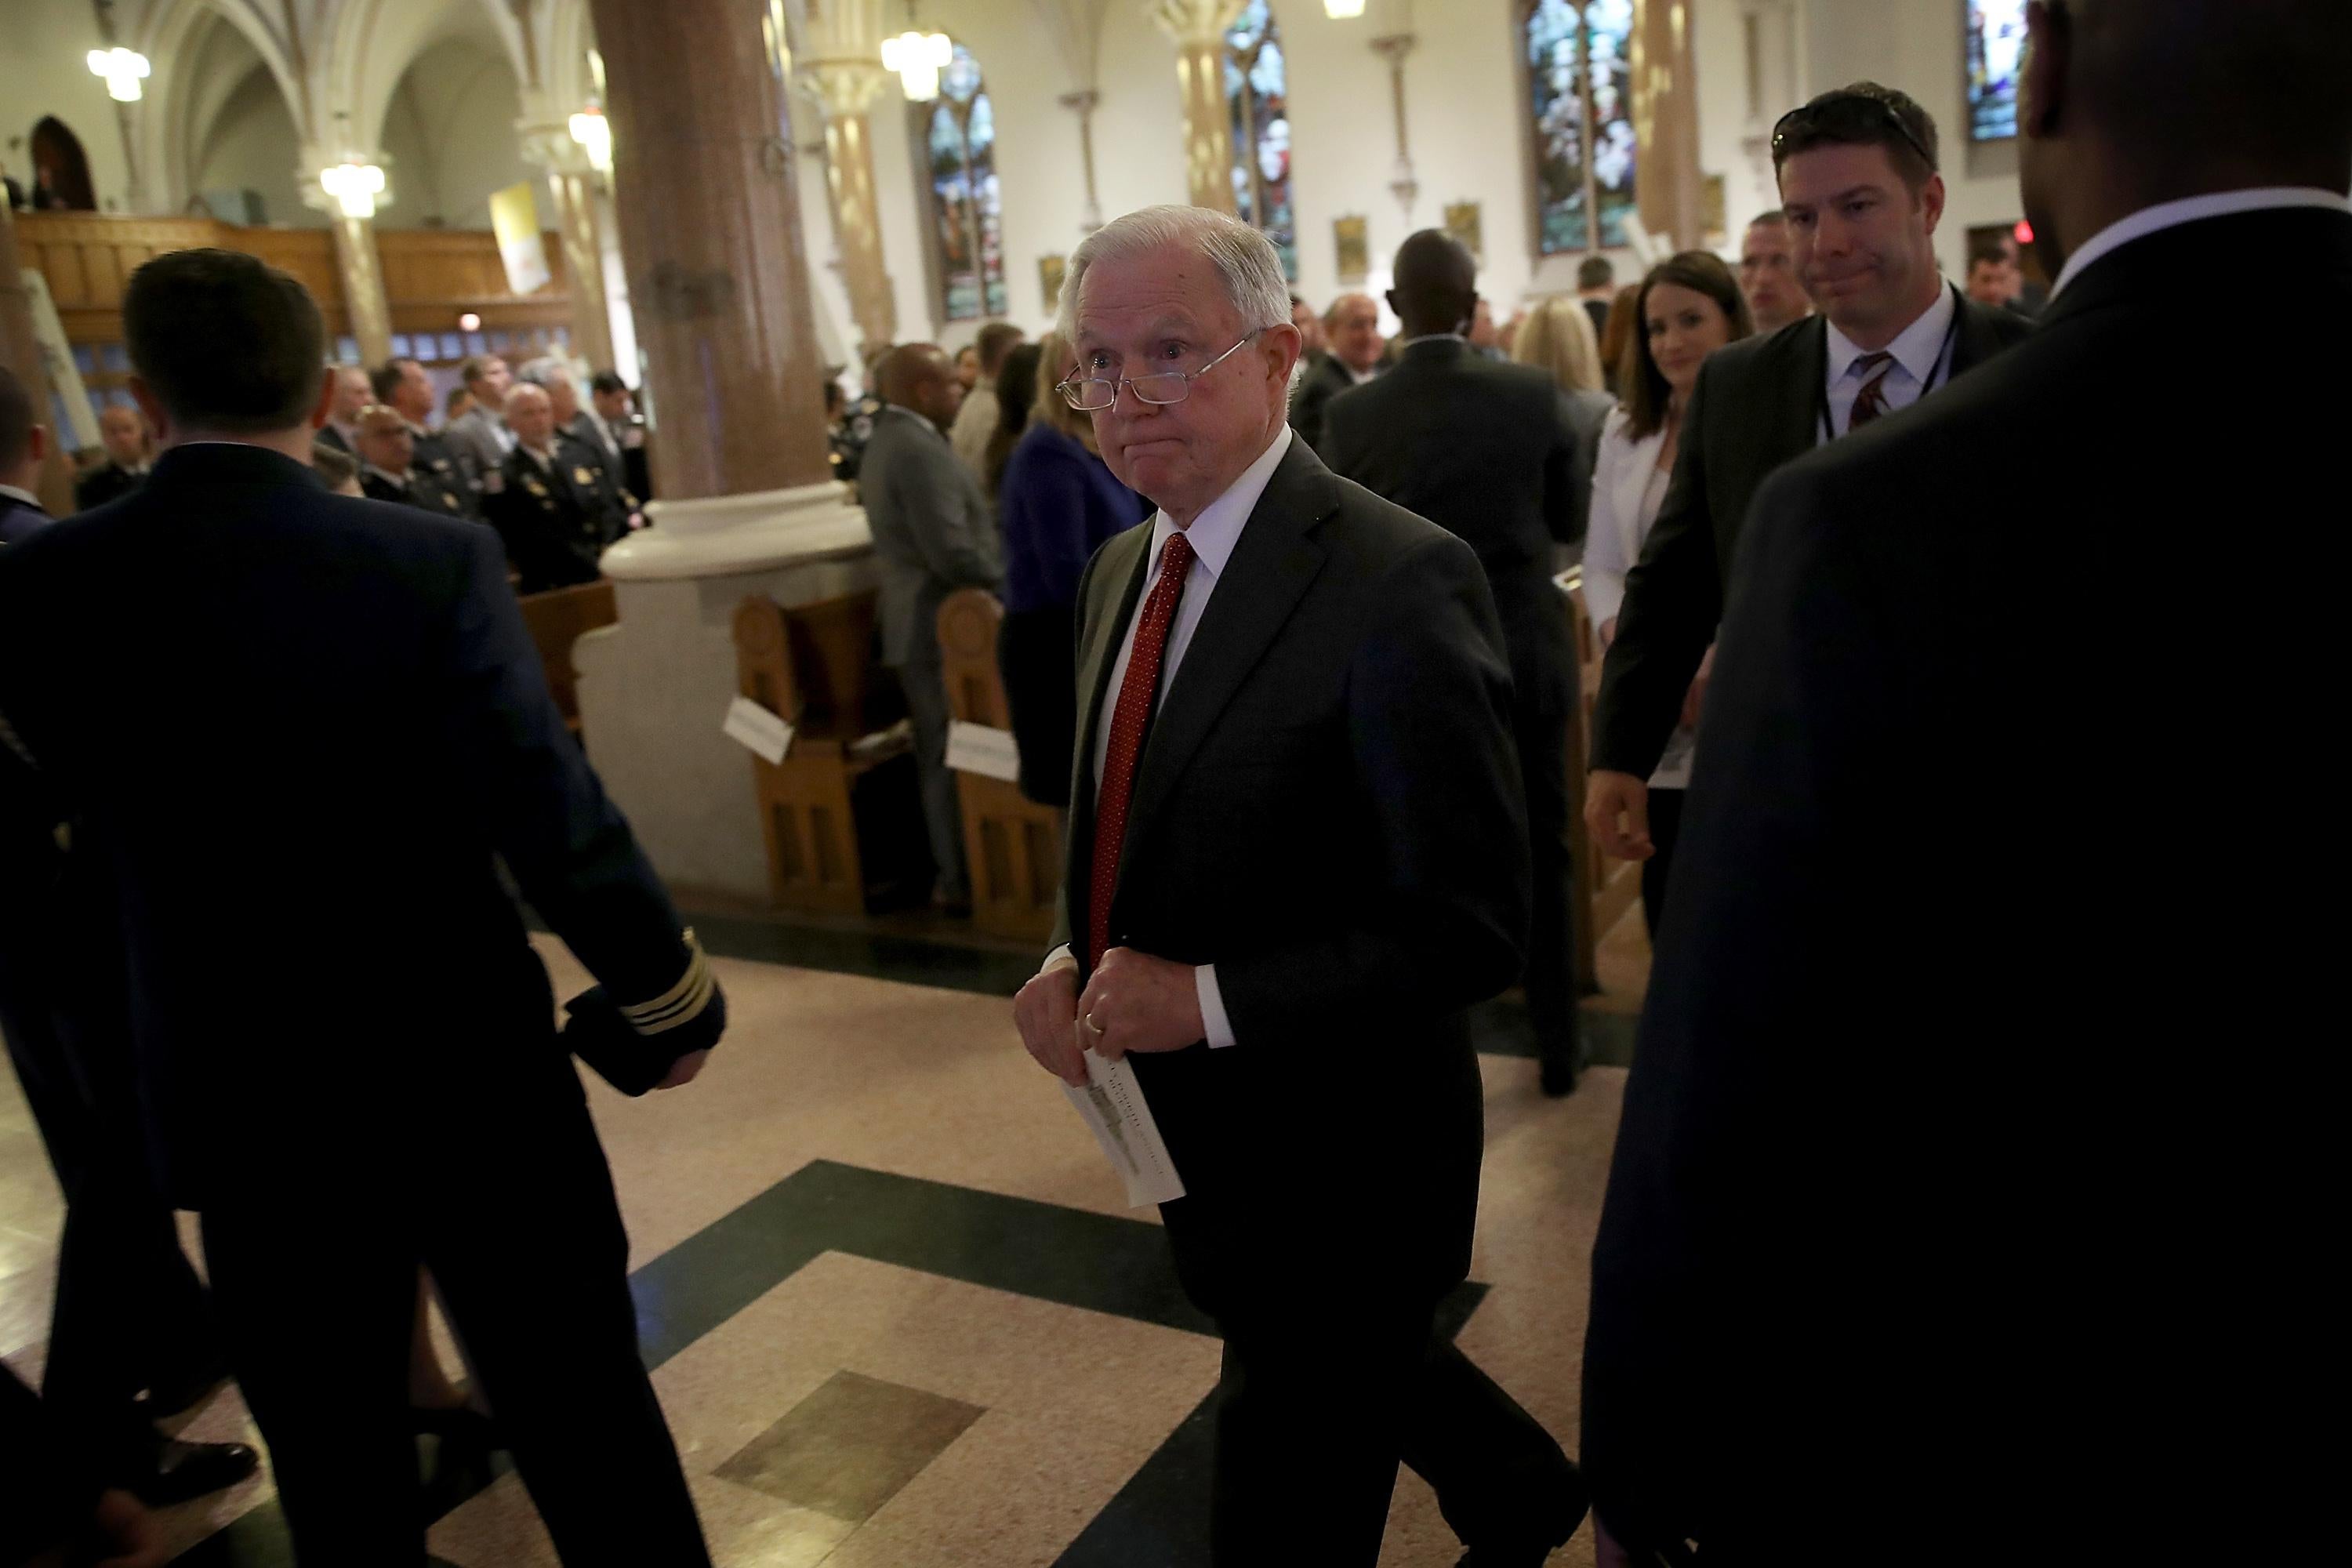 Jeff Sessions walking through a cathedral sanctuary with other worshippers